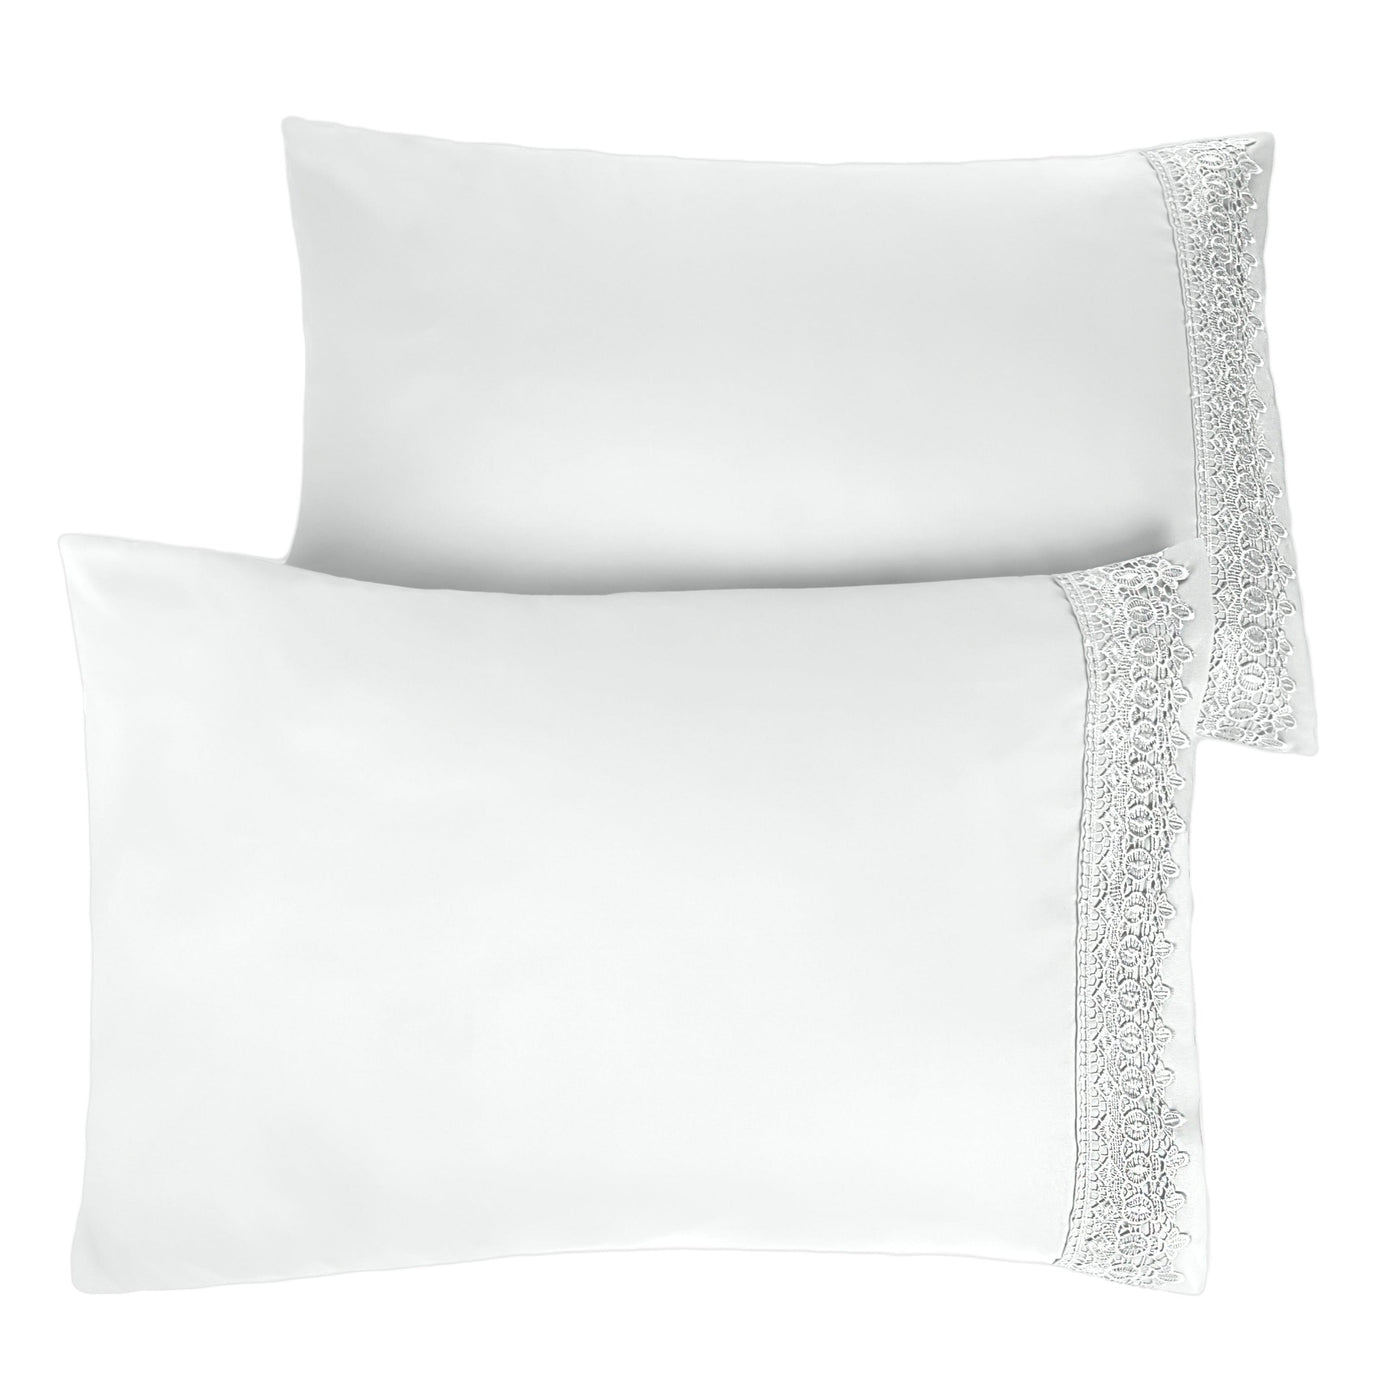 Two Vilano Lace Hem Pillow Cases in White Stack Together#color_vilano-bright-white